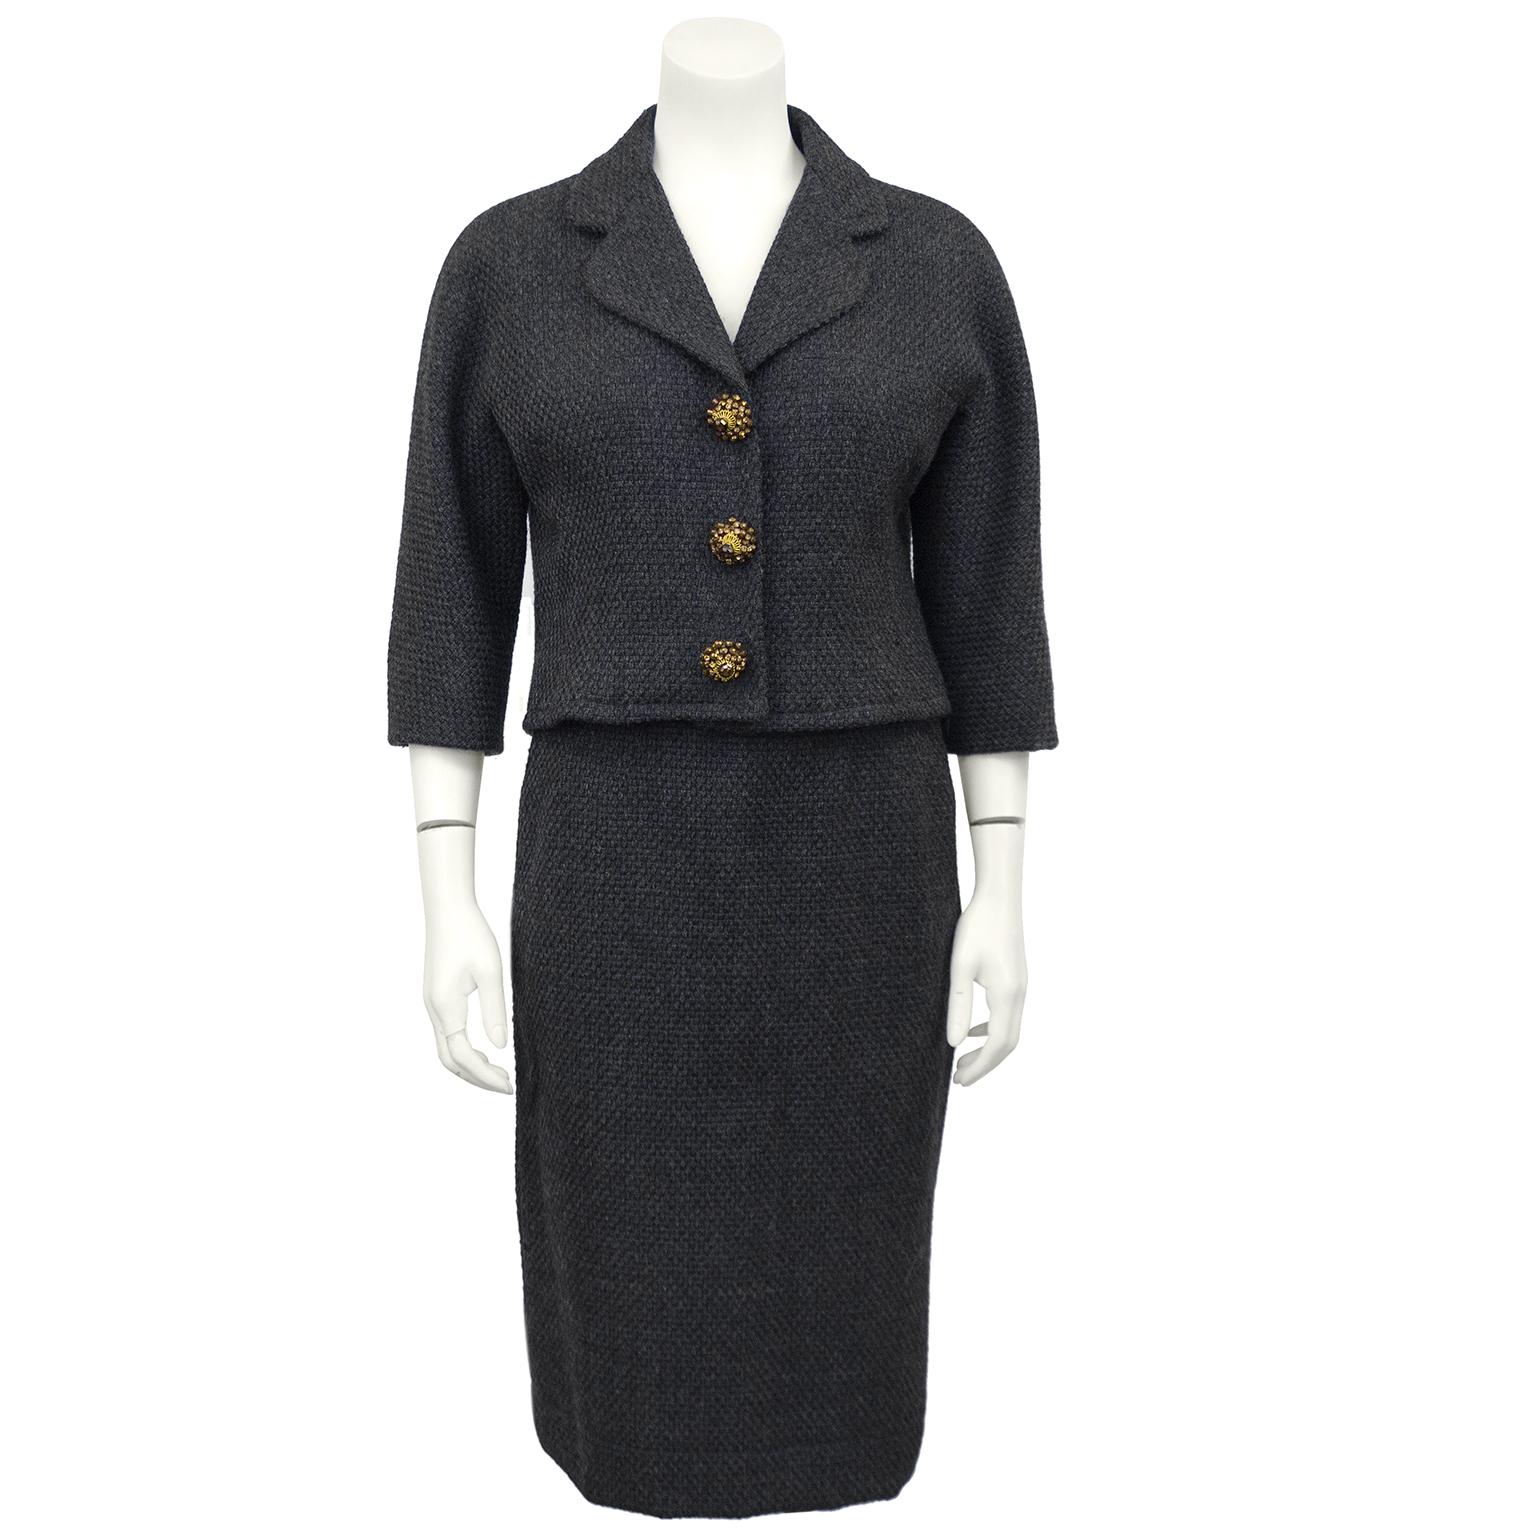 1950s Charcoal Gray Balenciaga Skirt Suit With Oversized Jewelled Buttons